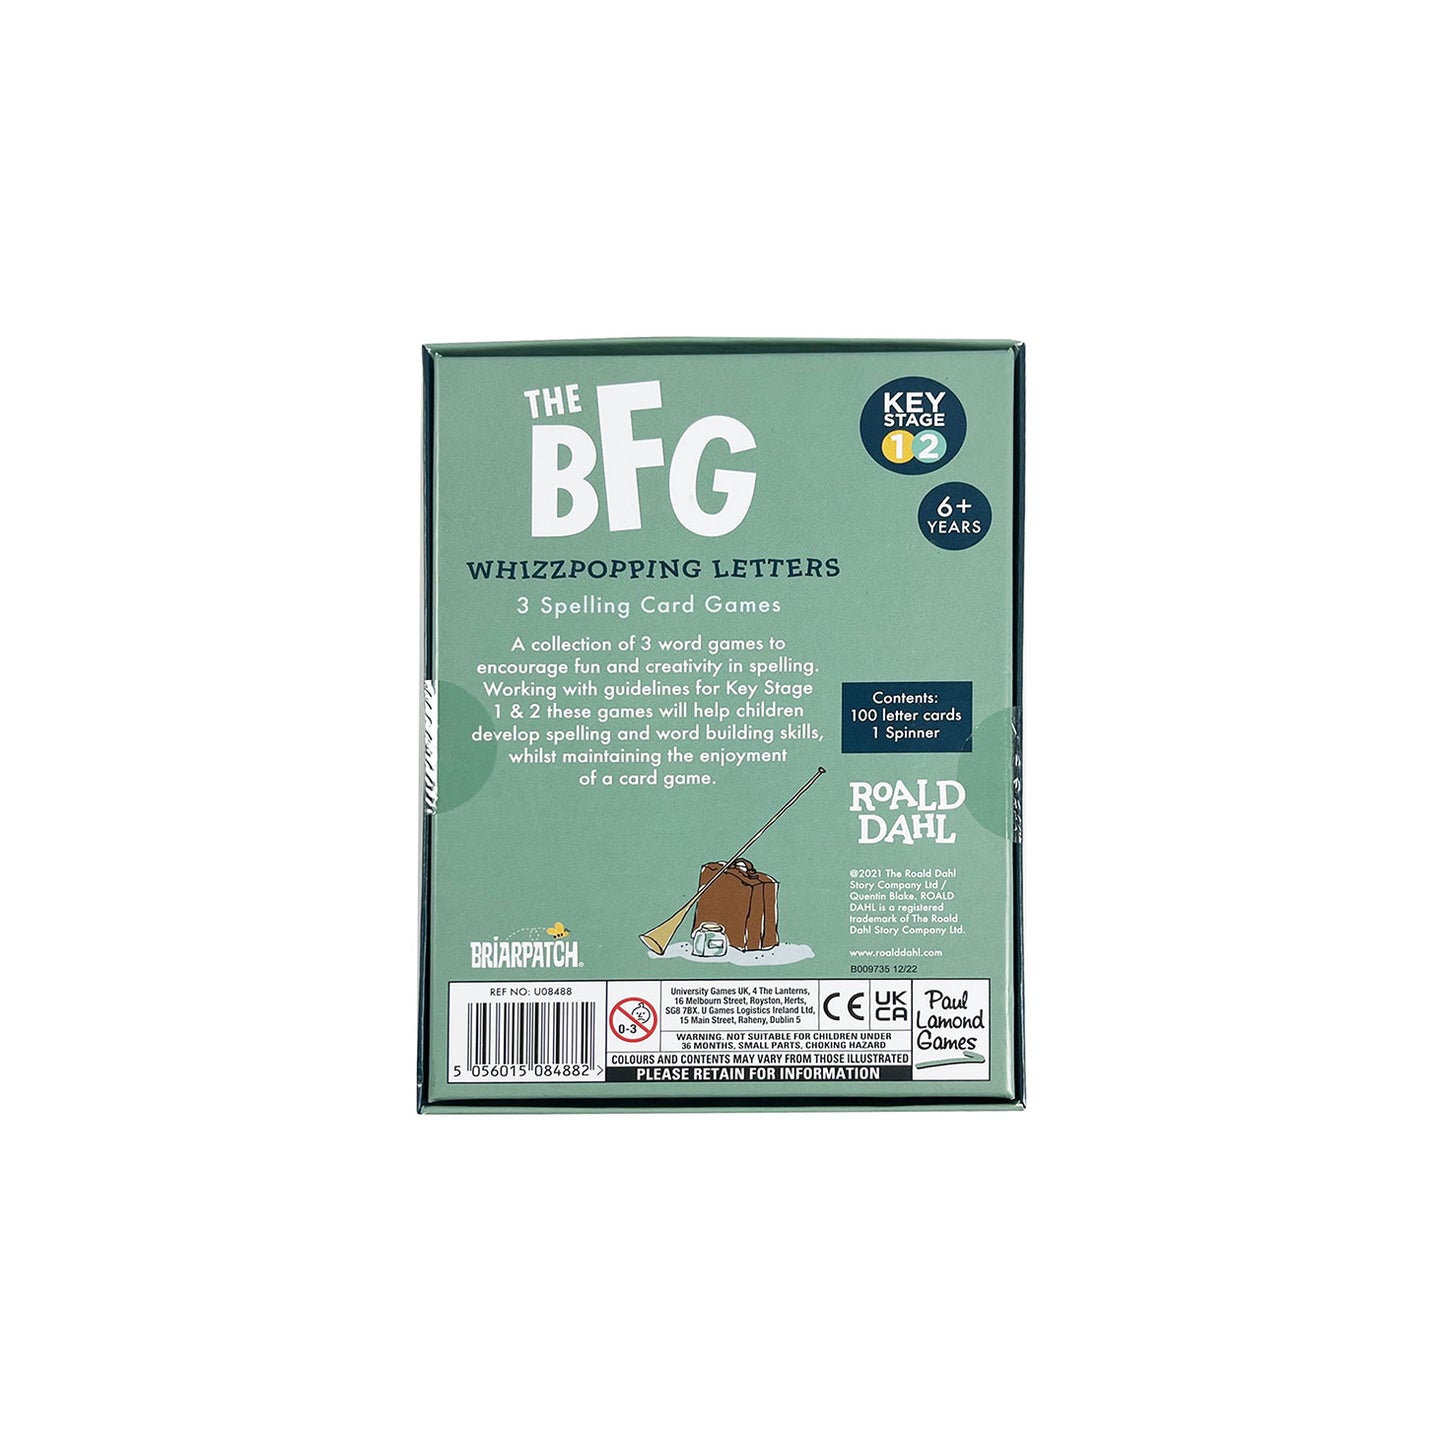 Back view of The BFG Whizzpopping Letters game